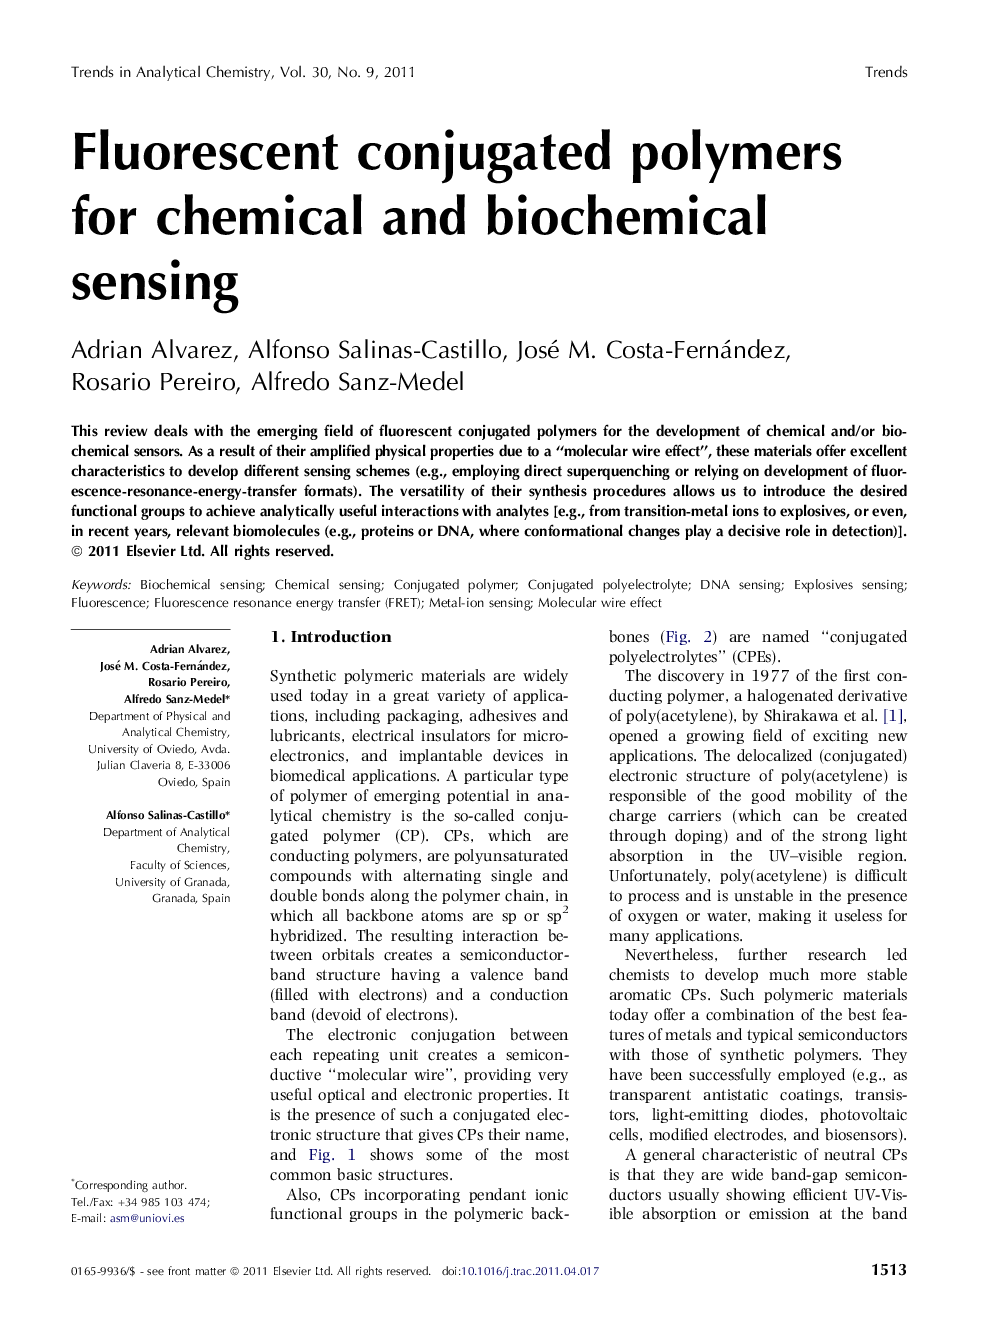 Fluorescent conjugated polymers for chemical and biochemical sensing